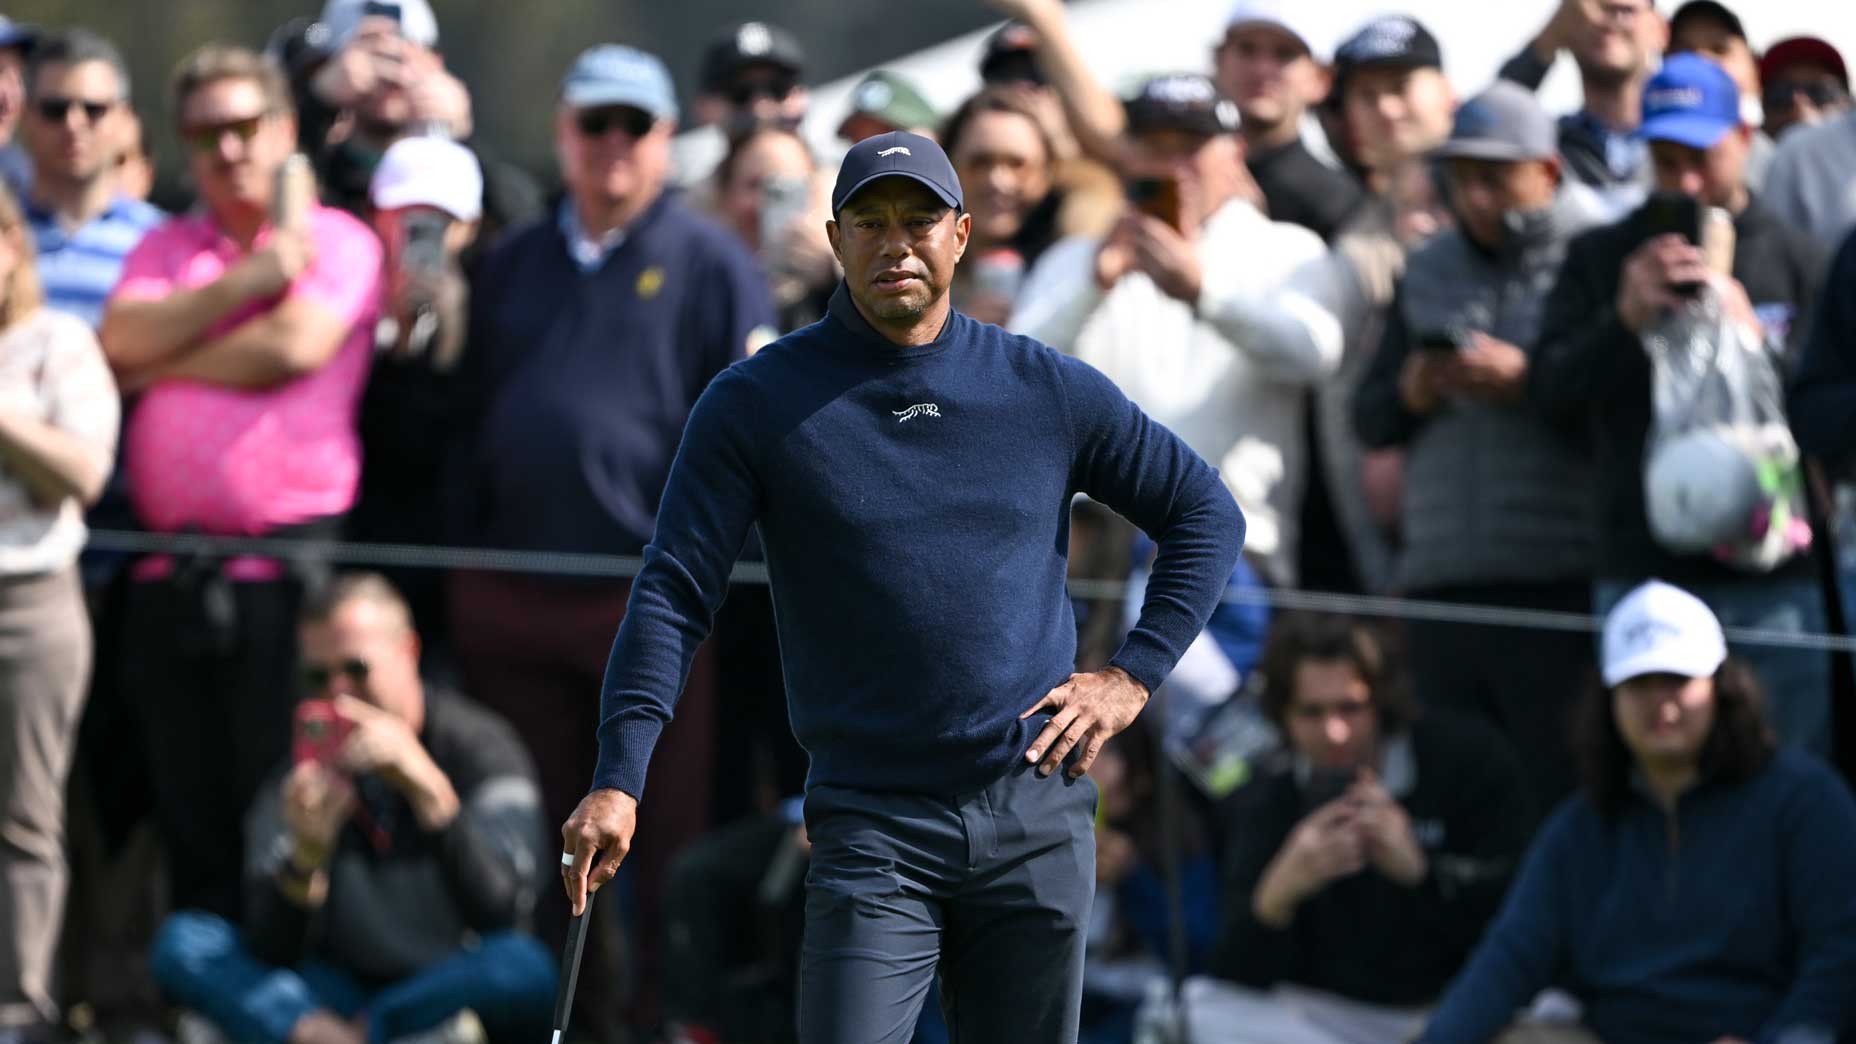 Tiger Woods stands on a green at the Genesis Invitational.